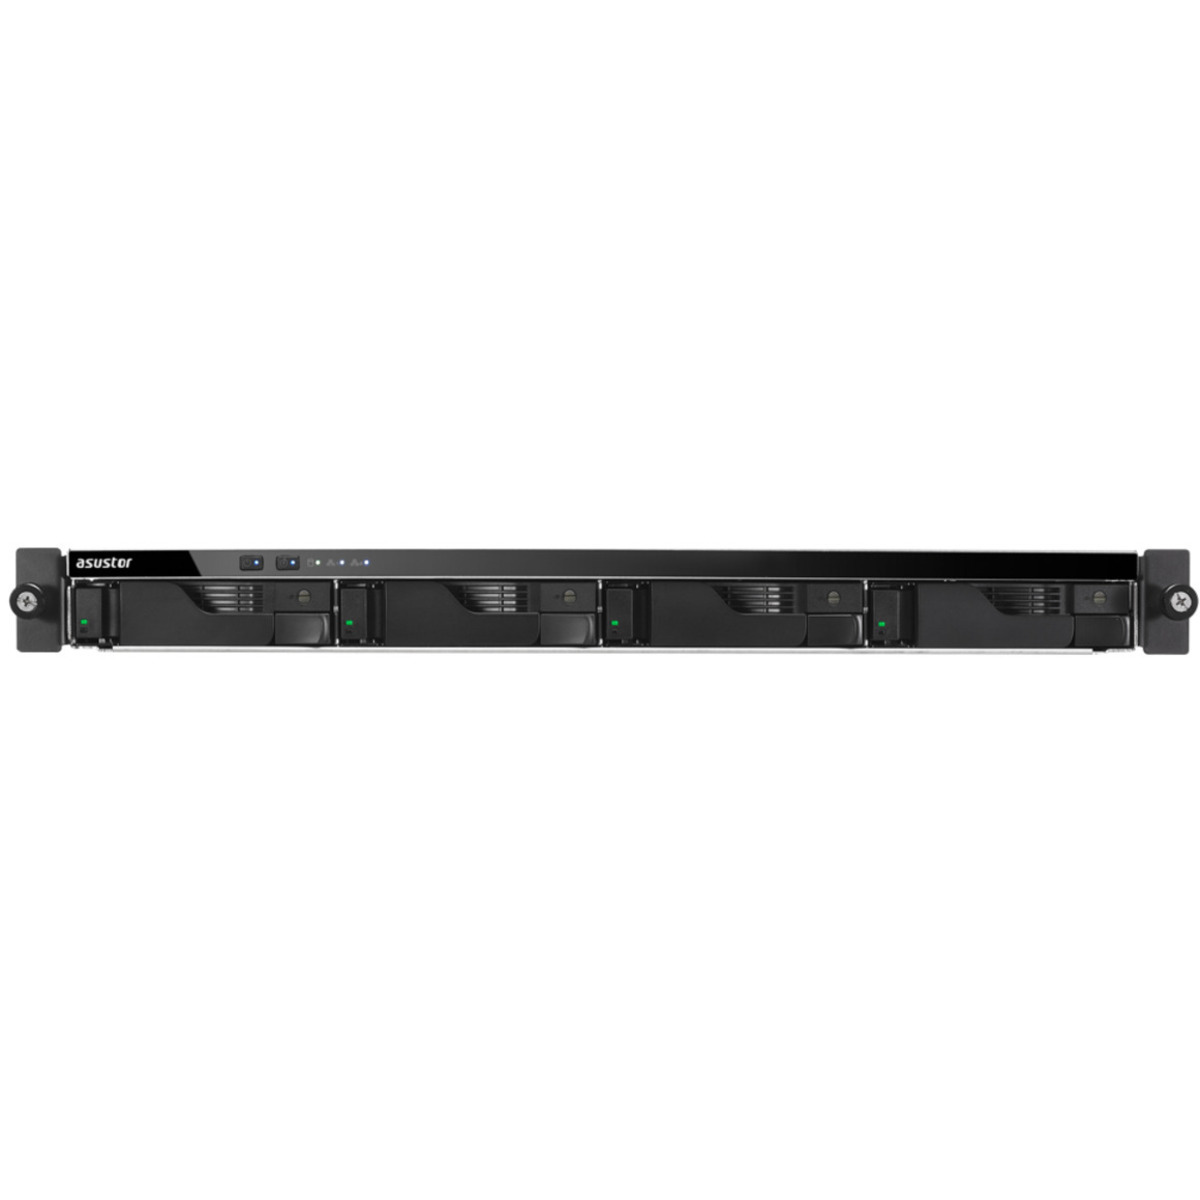 buy $2415 ASUSTOR LOCKERSTOR 4RS AS6504RS 16tb RackMount NAS - Network Attached Storage Device 4x4000gb Samsung 870 EVO MZ-77E4T0BAM 2.5 560/530MB/s SATA 6Gb/s SSD CONSUMER Class Drives Installed - Burn-In Tested - FREE RAM UPGRADE - nas headquarters buy network attached storage server device das new raid-5 free shipping simply usa LOCKERSTOR 4RS AS6504RS